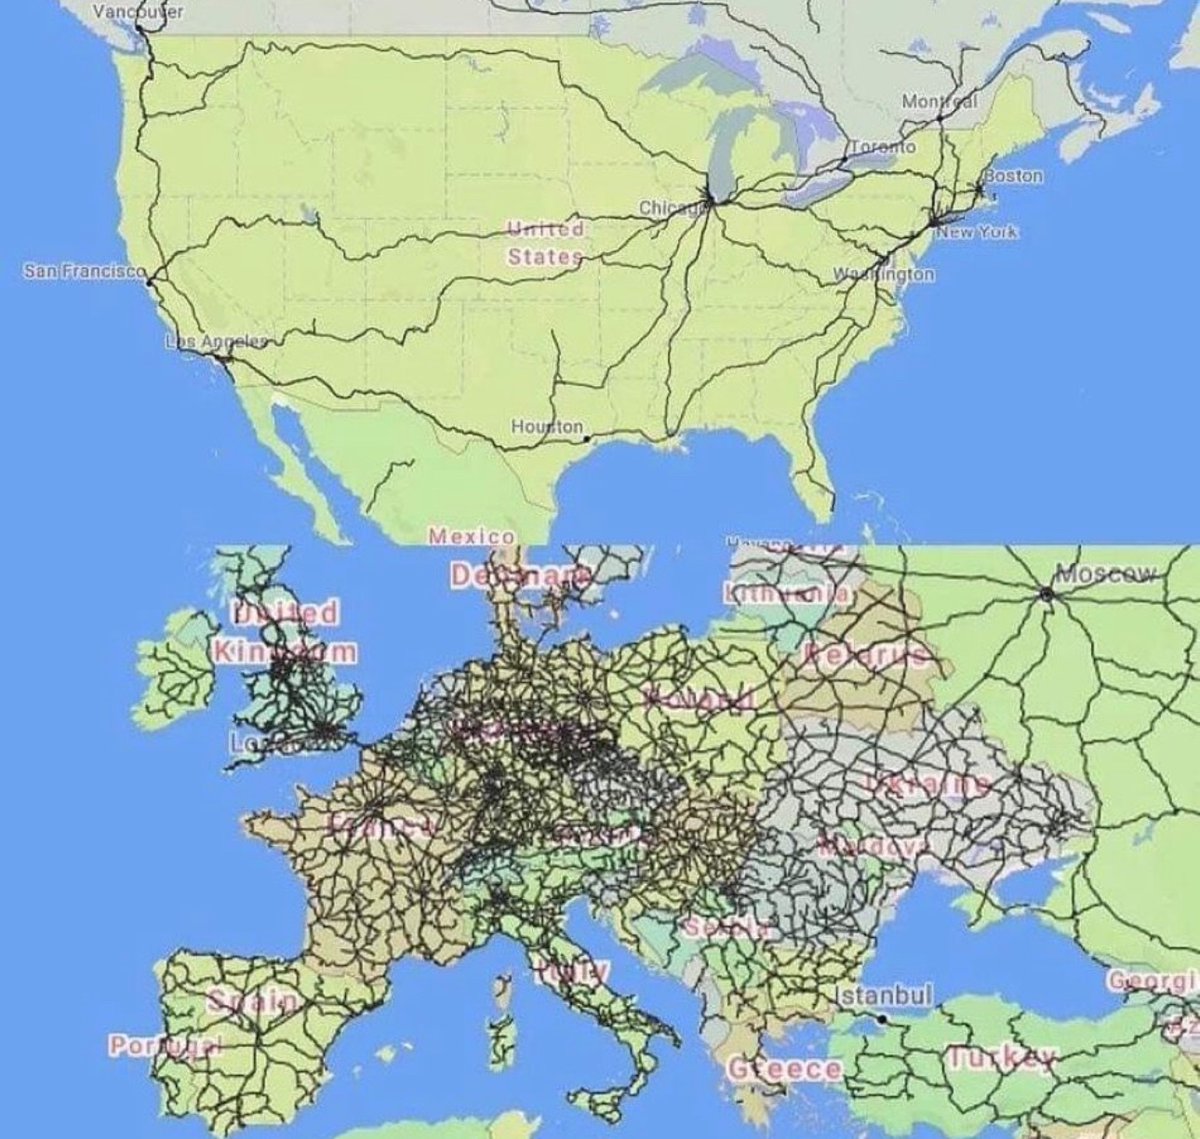 Passenger train lines in the USA vs Europe